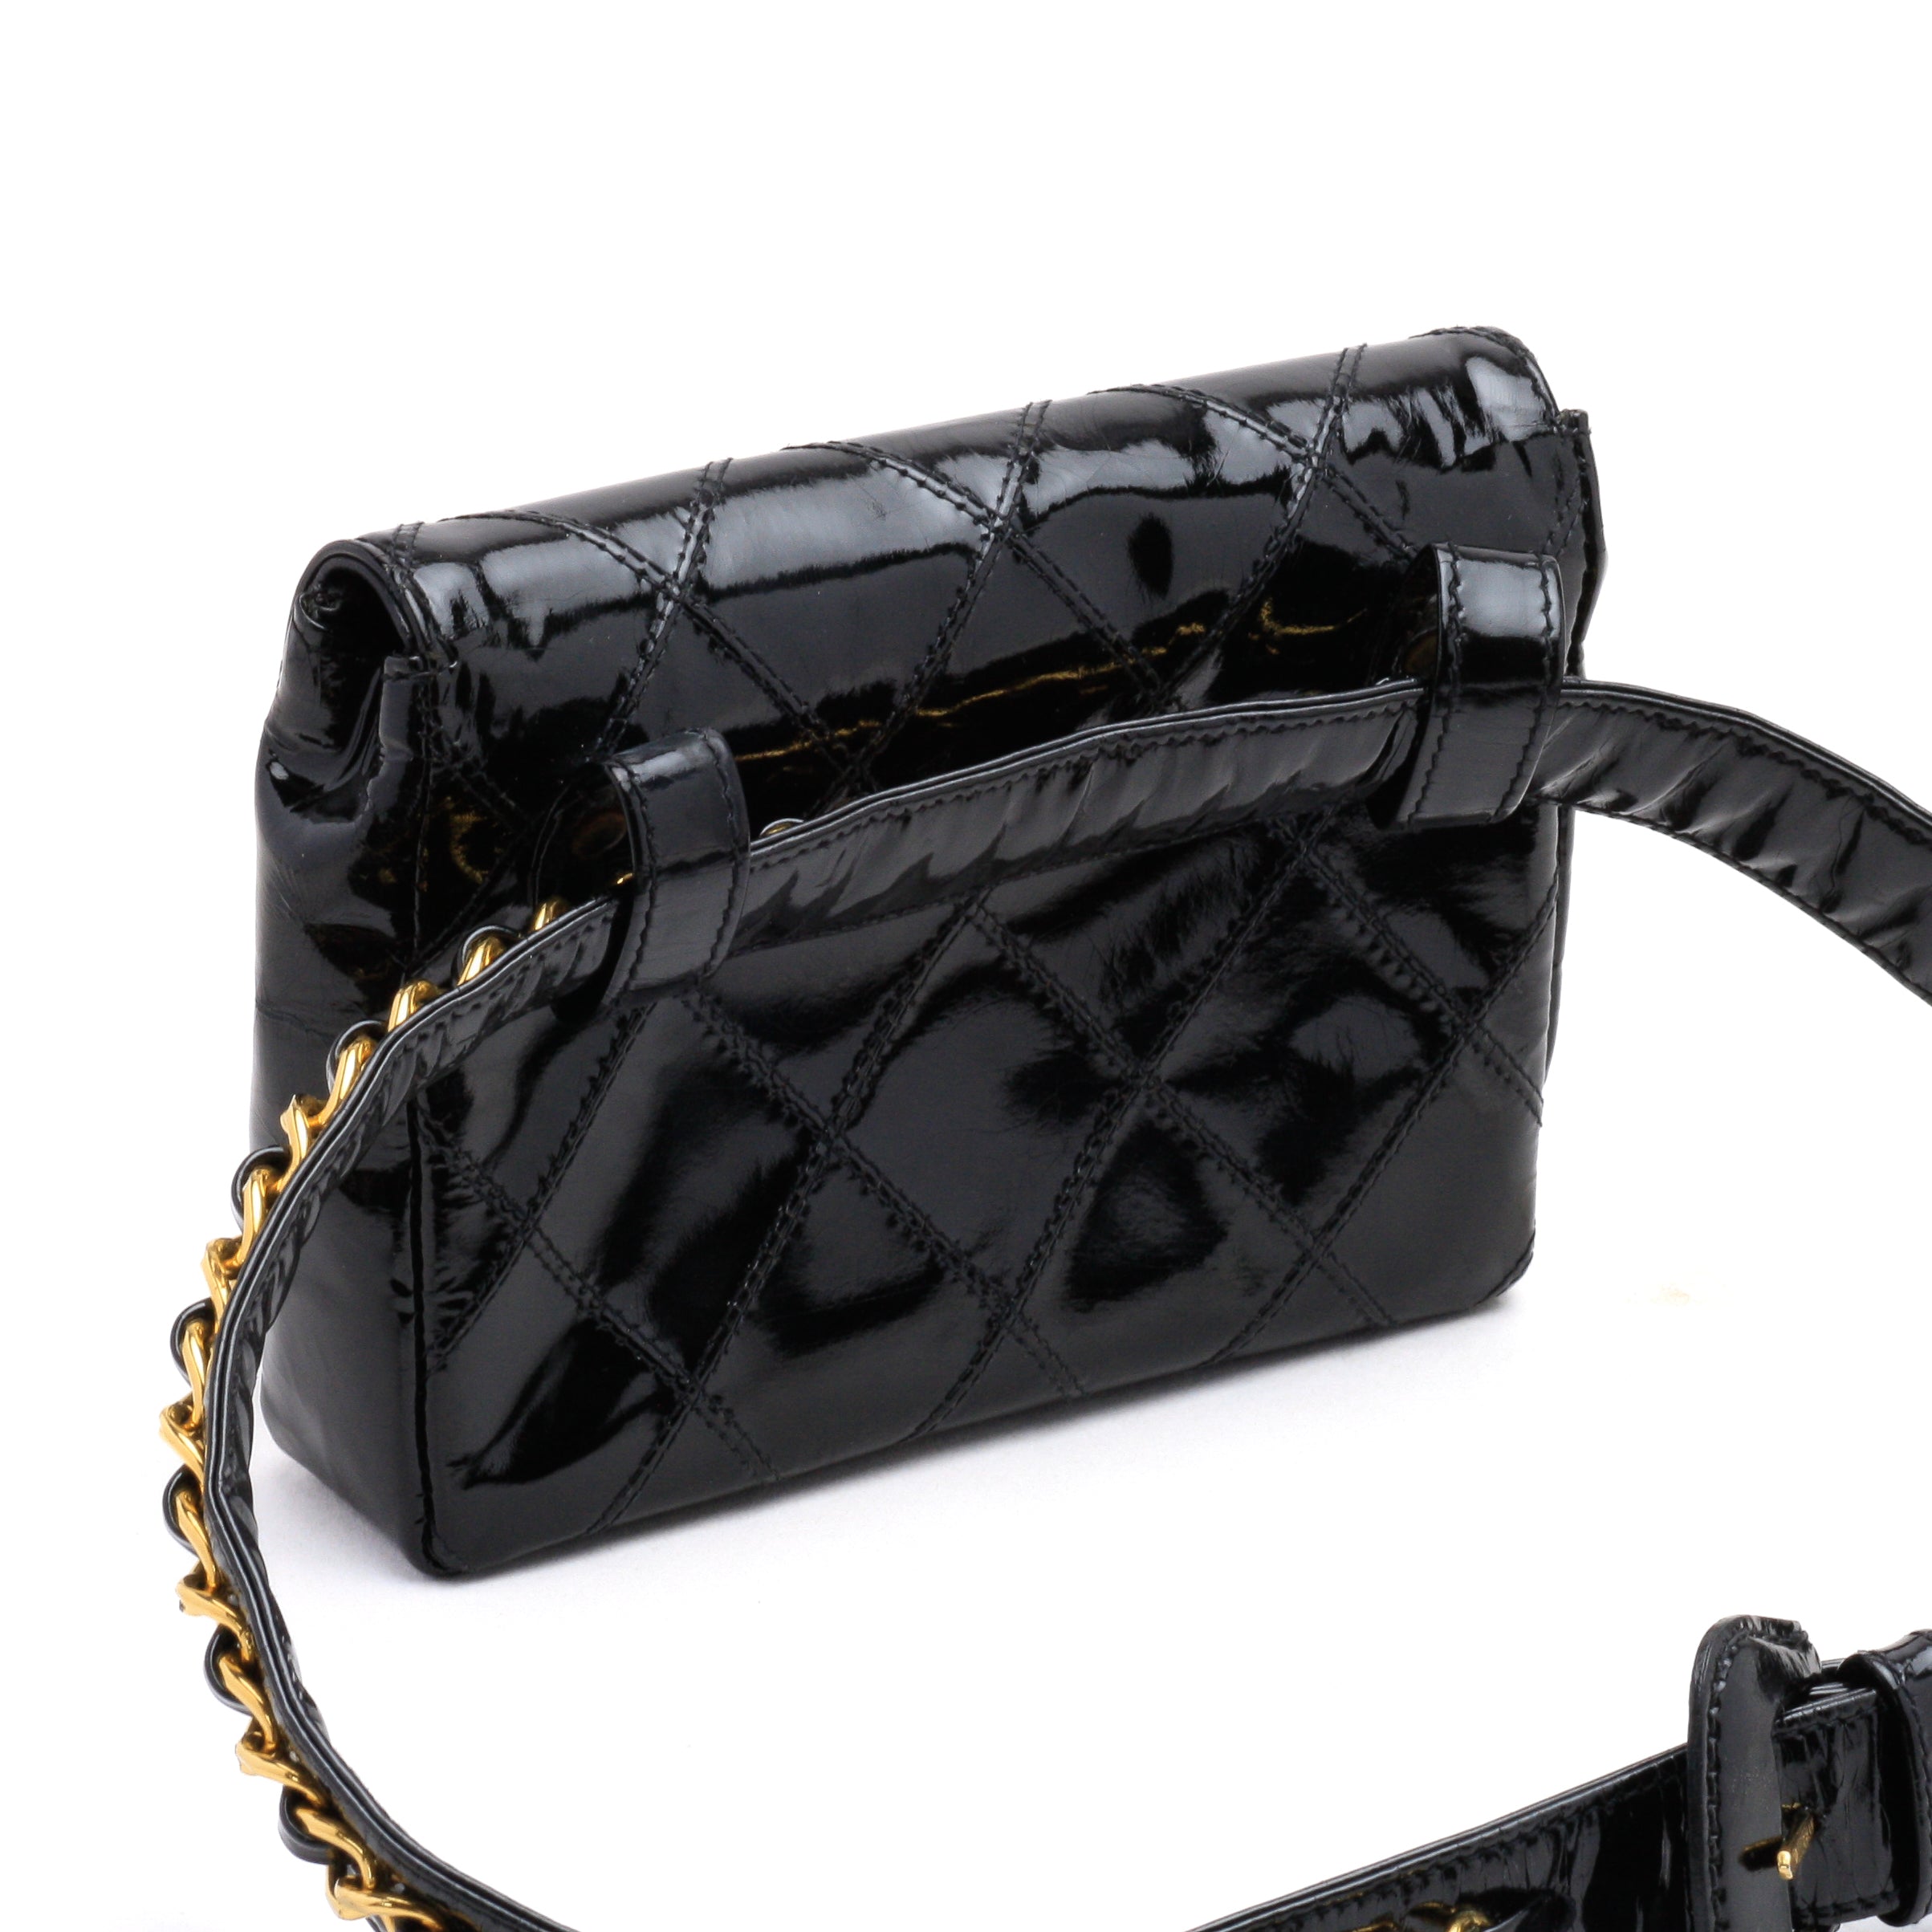 Black Patent Leather Chanel Handbags Collection